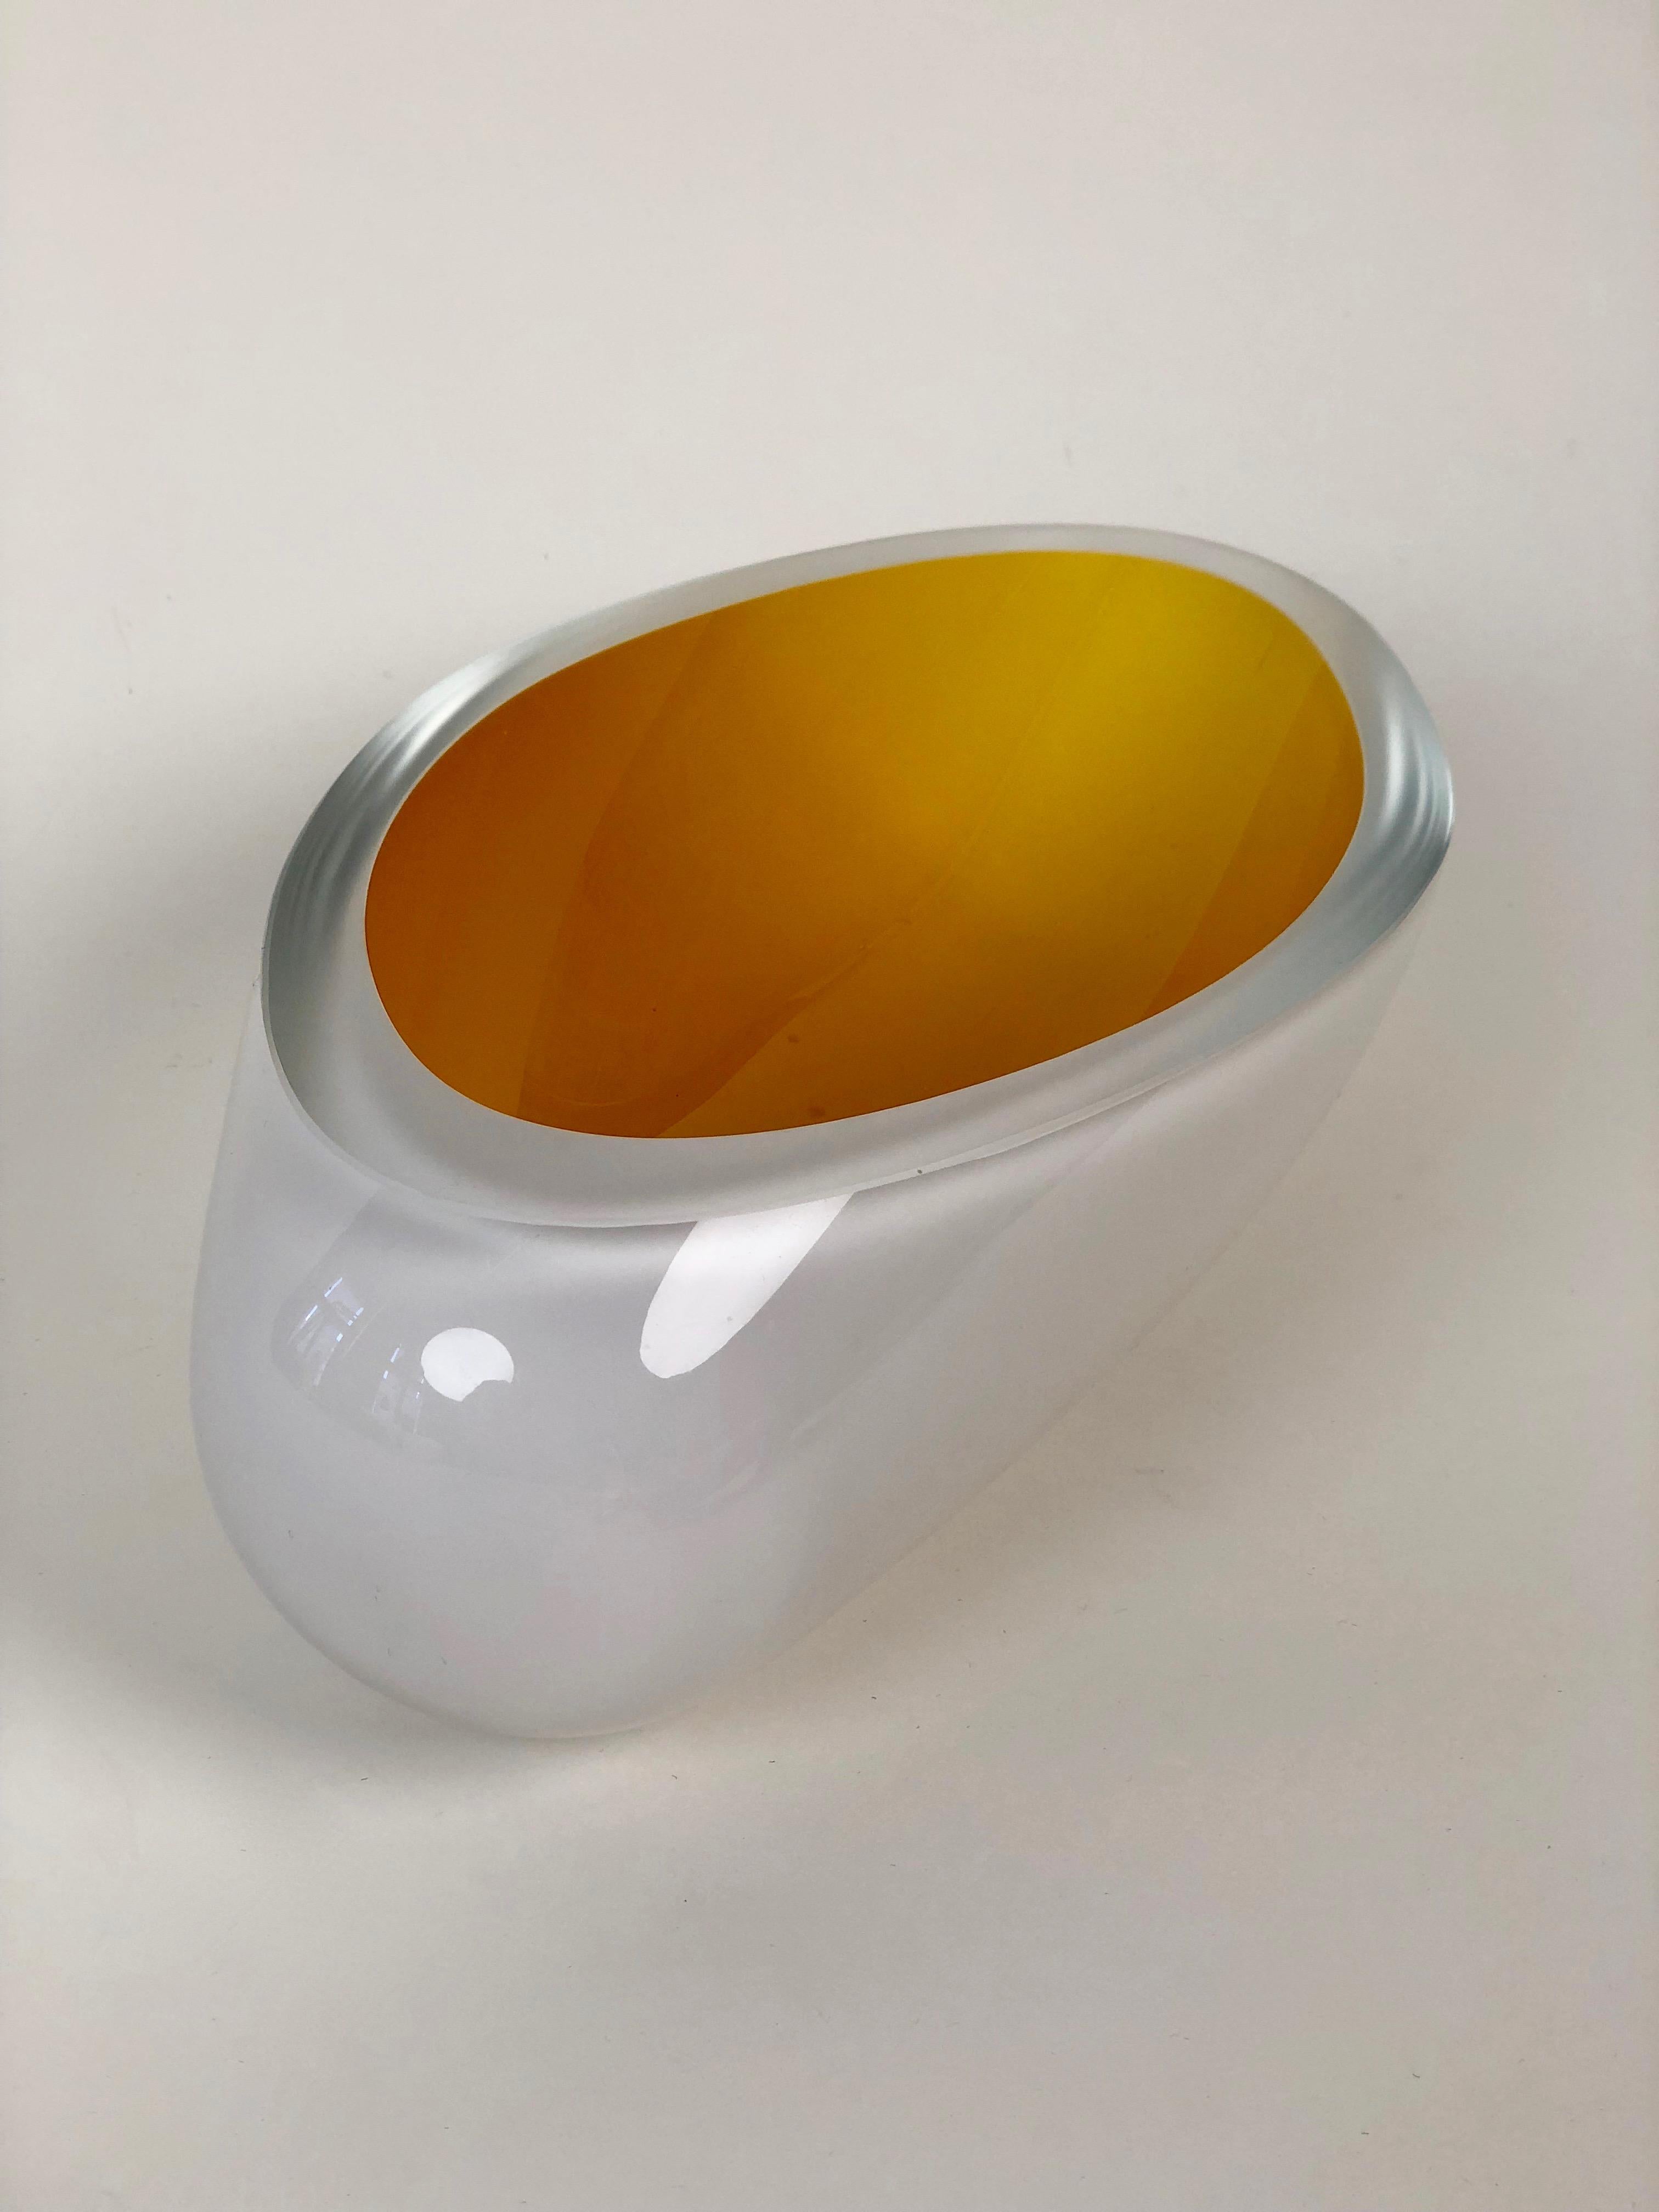 Contemporary Studio Glass Bowl Made in the Czech Republic After 2010 In Good Condition For Sale In Vienna, Austria